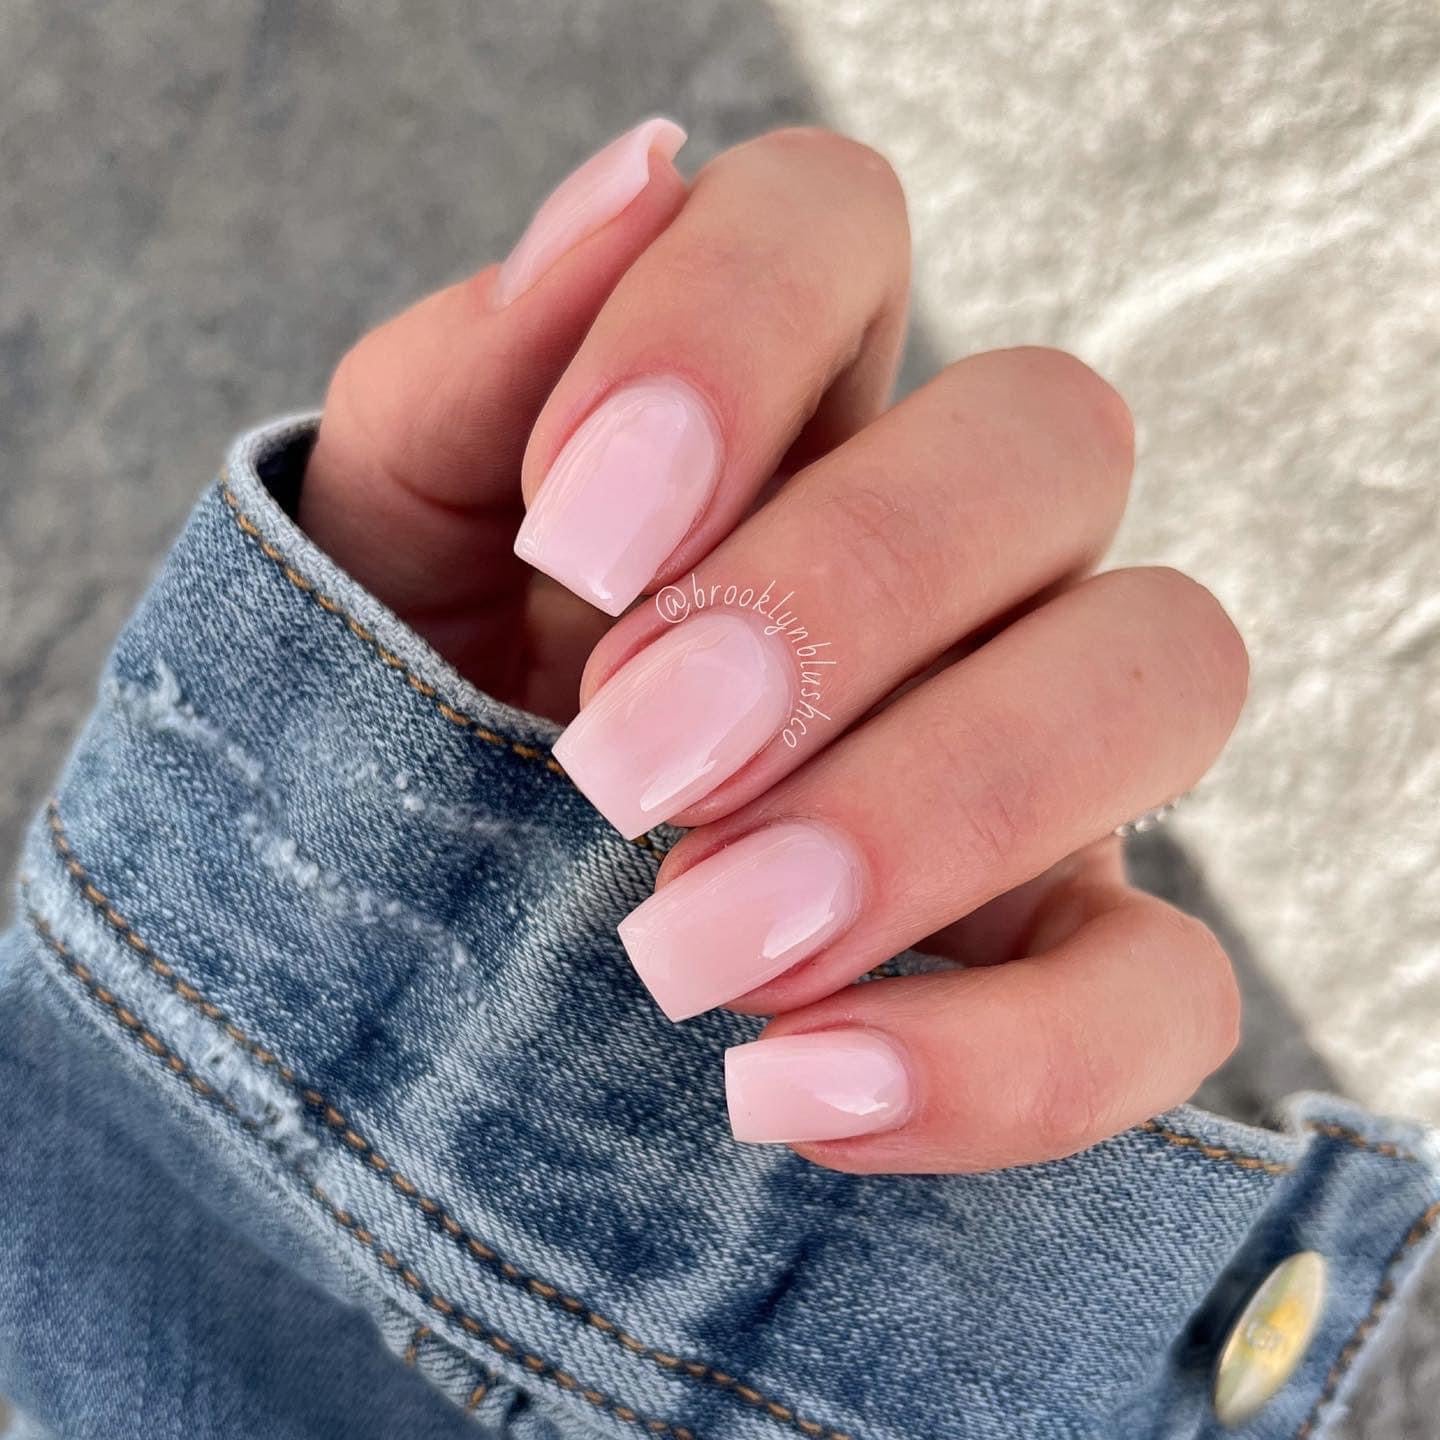 5 Must Have Pale Pink Nail Polishes for You! | ND Nails Supply